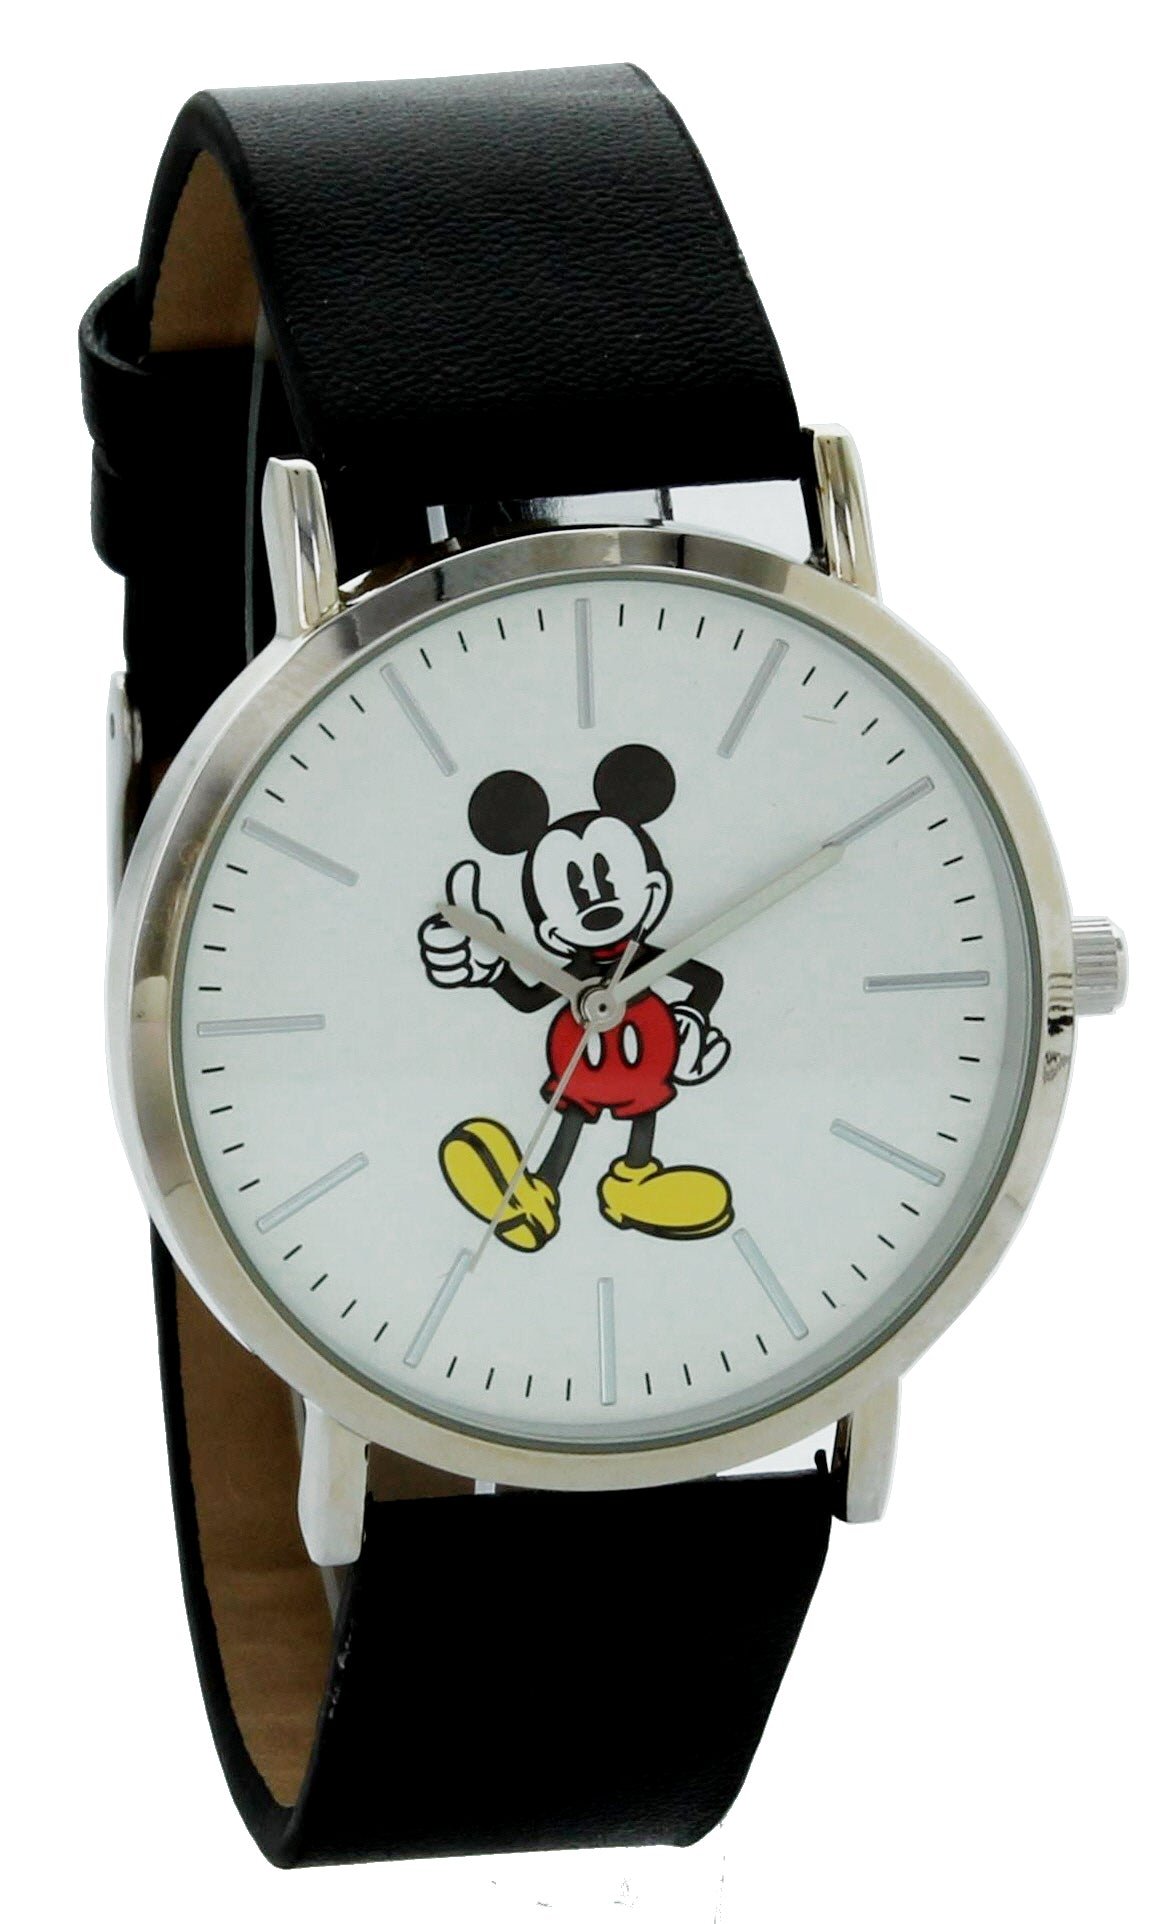 Model: Disney Mickey Mouse Watch with Silver Case and Black Band